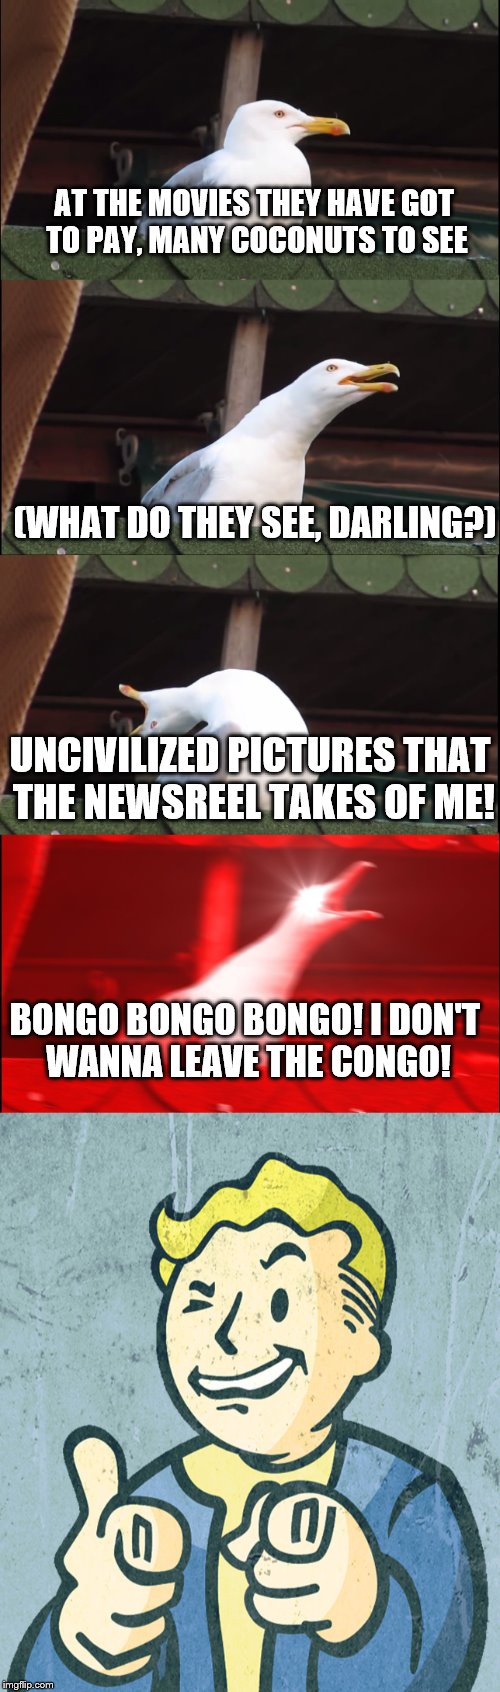 Civilization | AT THE MOVIES THEY HAVE GOT TO PAY, MANY COCONUTS TO SEE; (WHAT DO THEY SEE, DARLING?); UNCIVILIZED PICTURES THAT THE NEWSREEL TAKES OF ME! BONGO BONGO BONGO! I DON'T WANNA LEAVE THE CONGO! | image tagged in memes,fallout,fallout76 | made w/ Imgflip meme maker